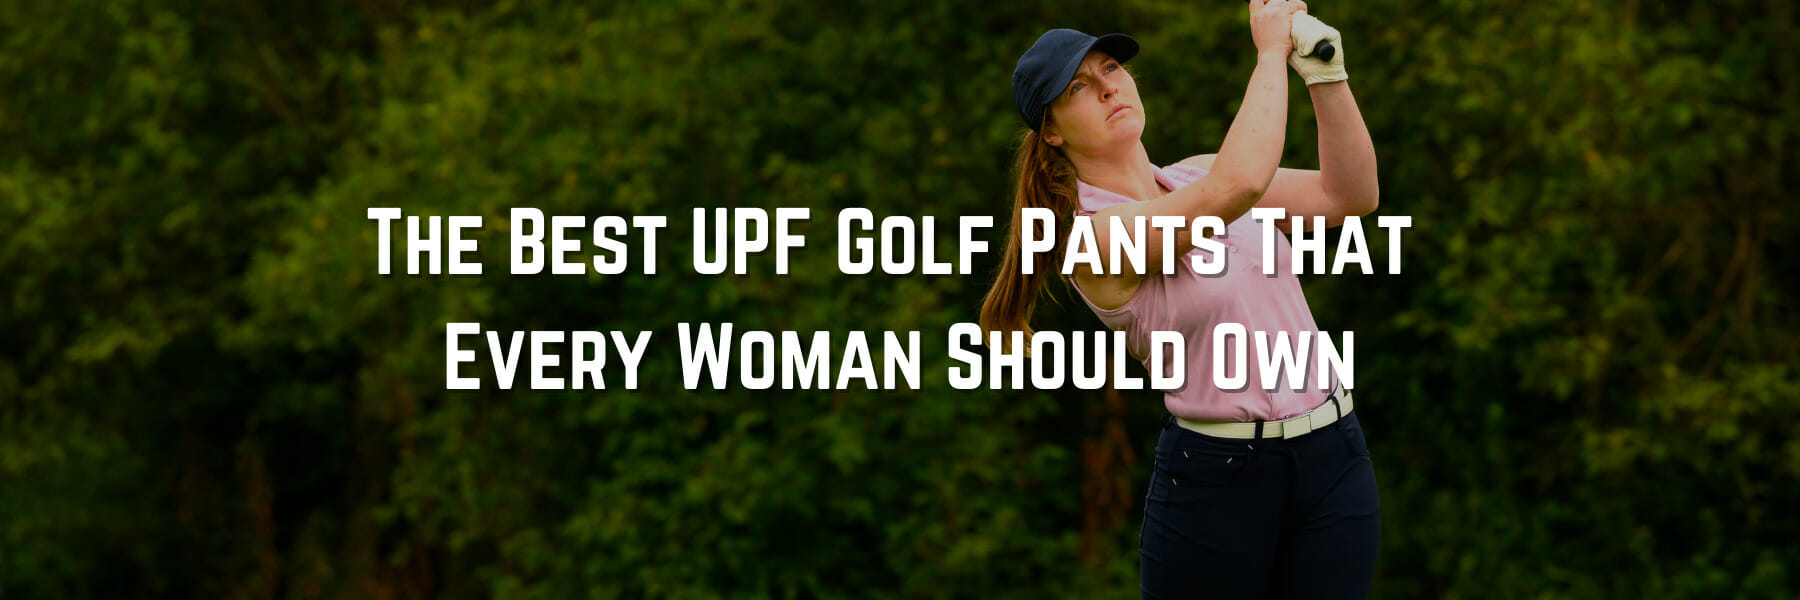 The Best UPF Golf Pants That Every Woman Should Own